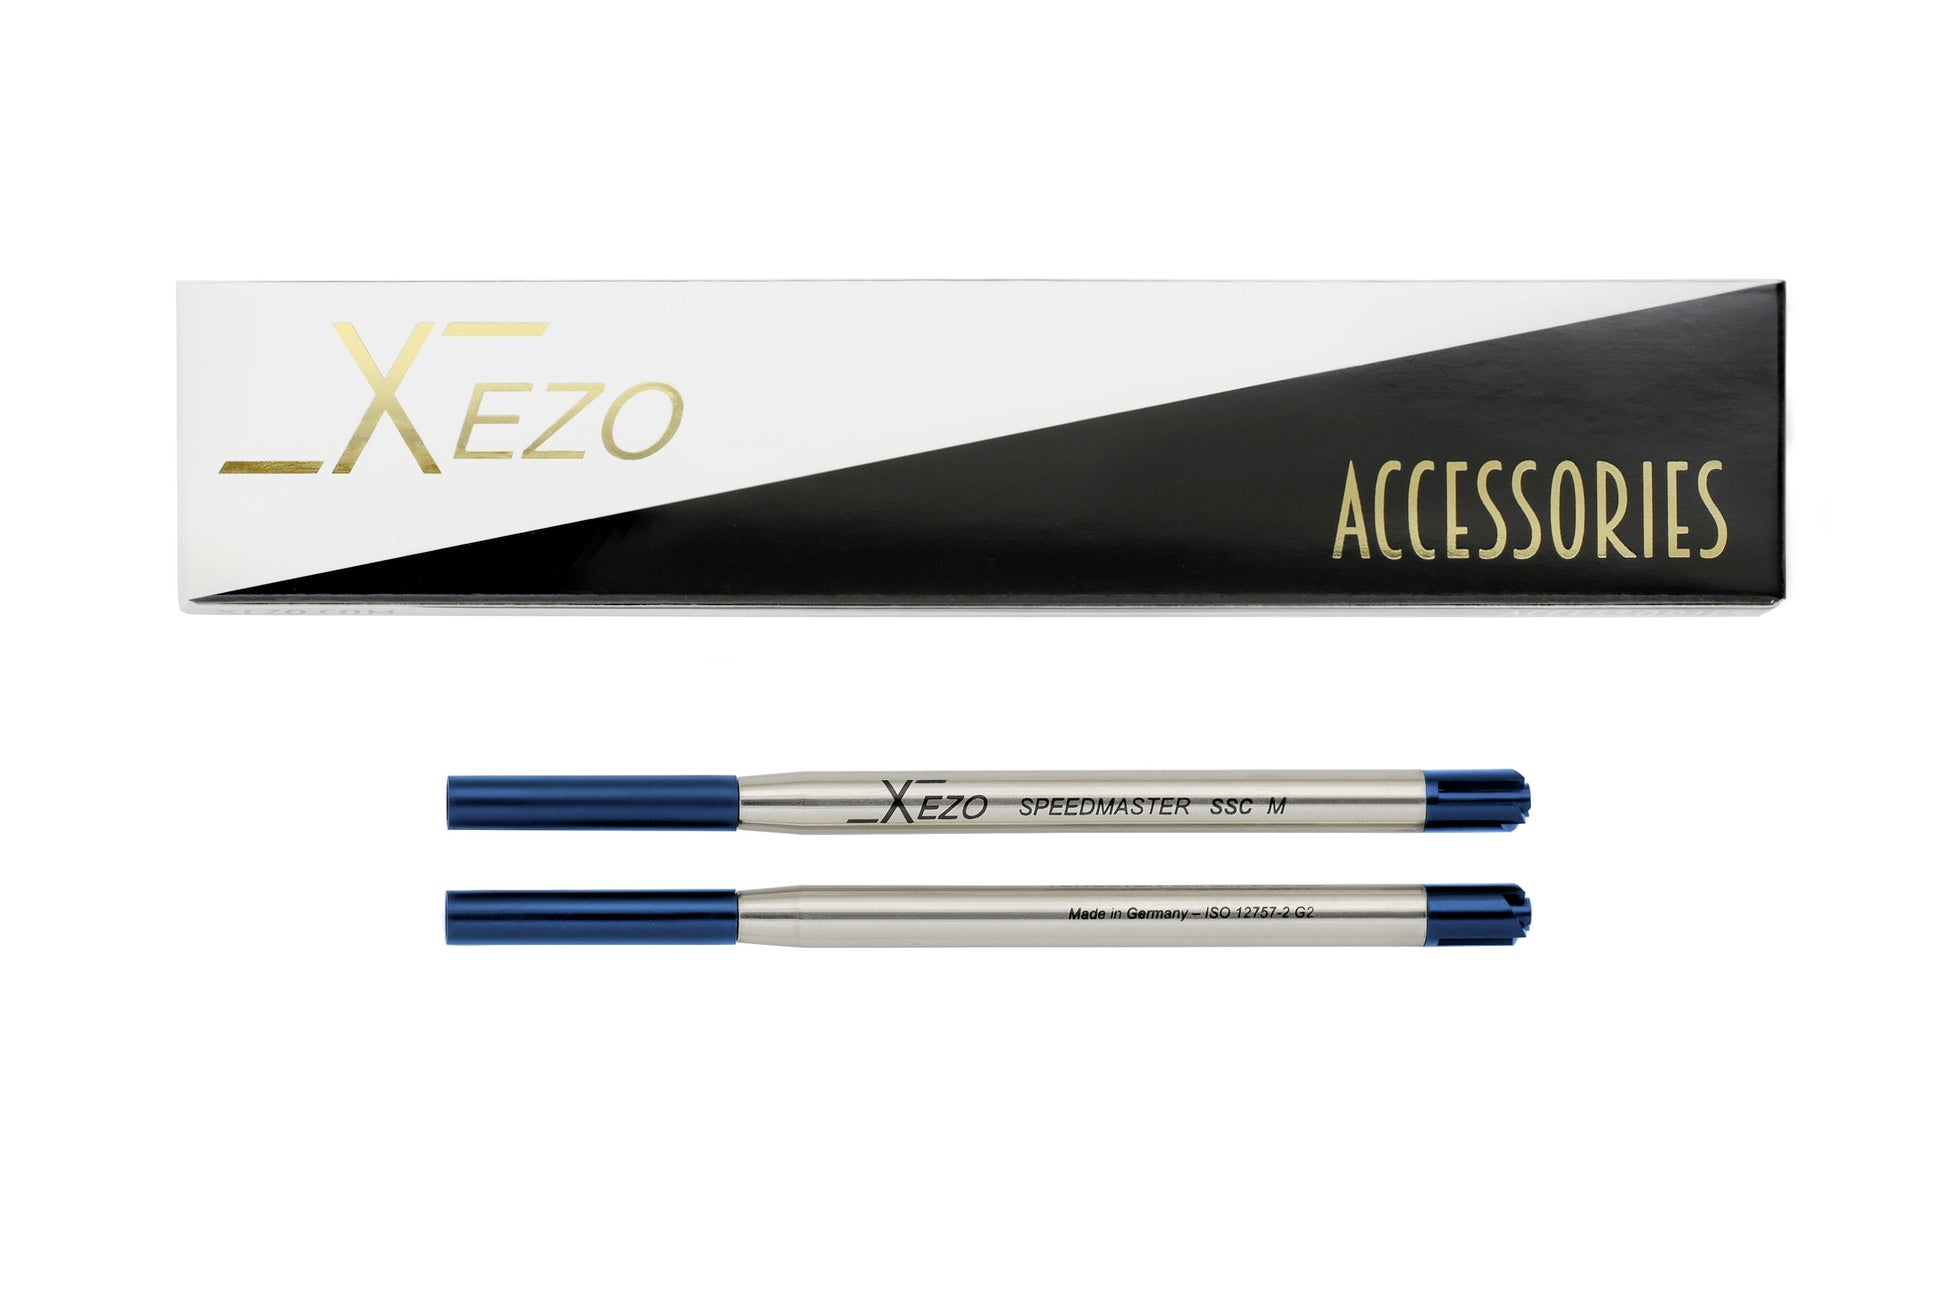 Xezo - Two blue ballpoint ink cartridges and a Xezo ACCESSORIES box - Xezo Speedmaster SSC-M Blue Ballpoint Refills - Pack of 2